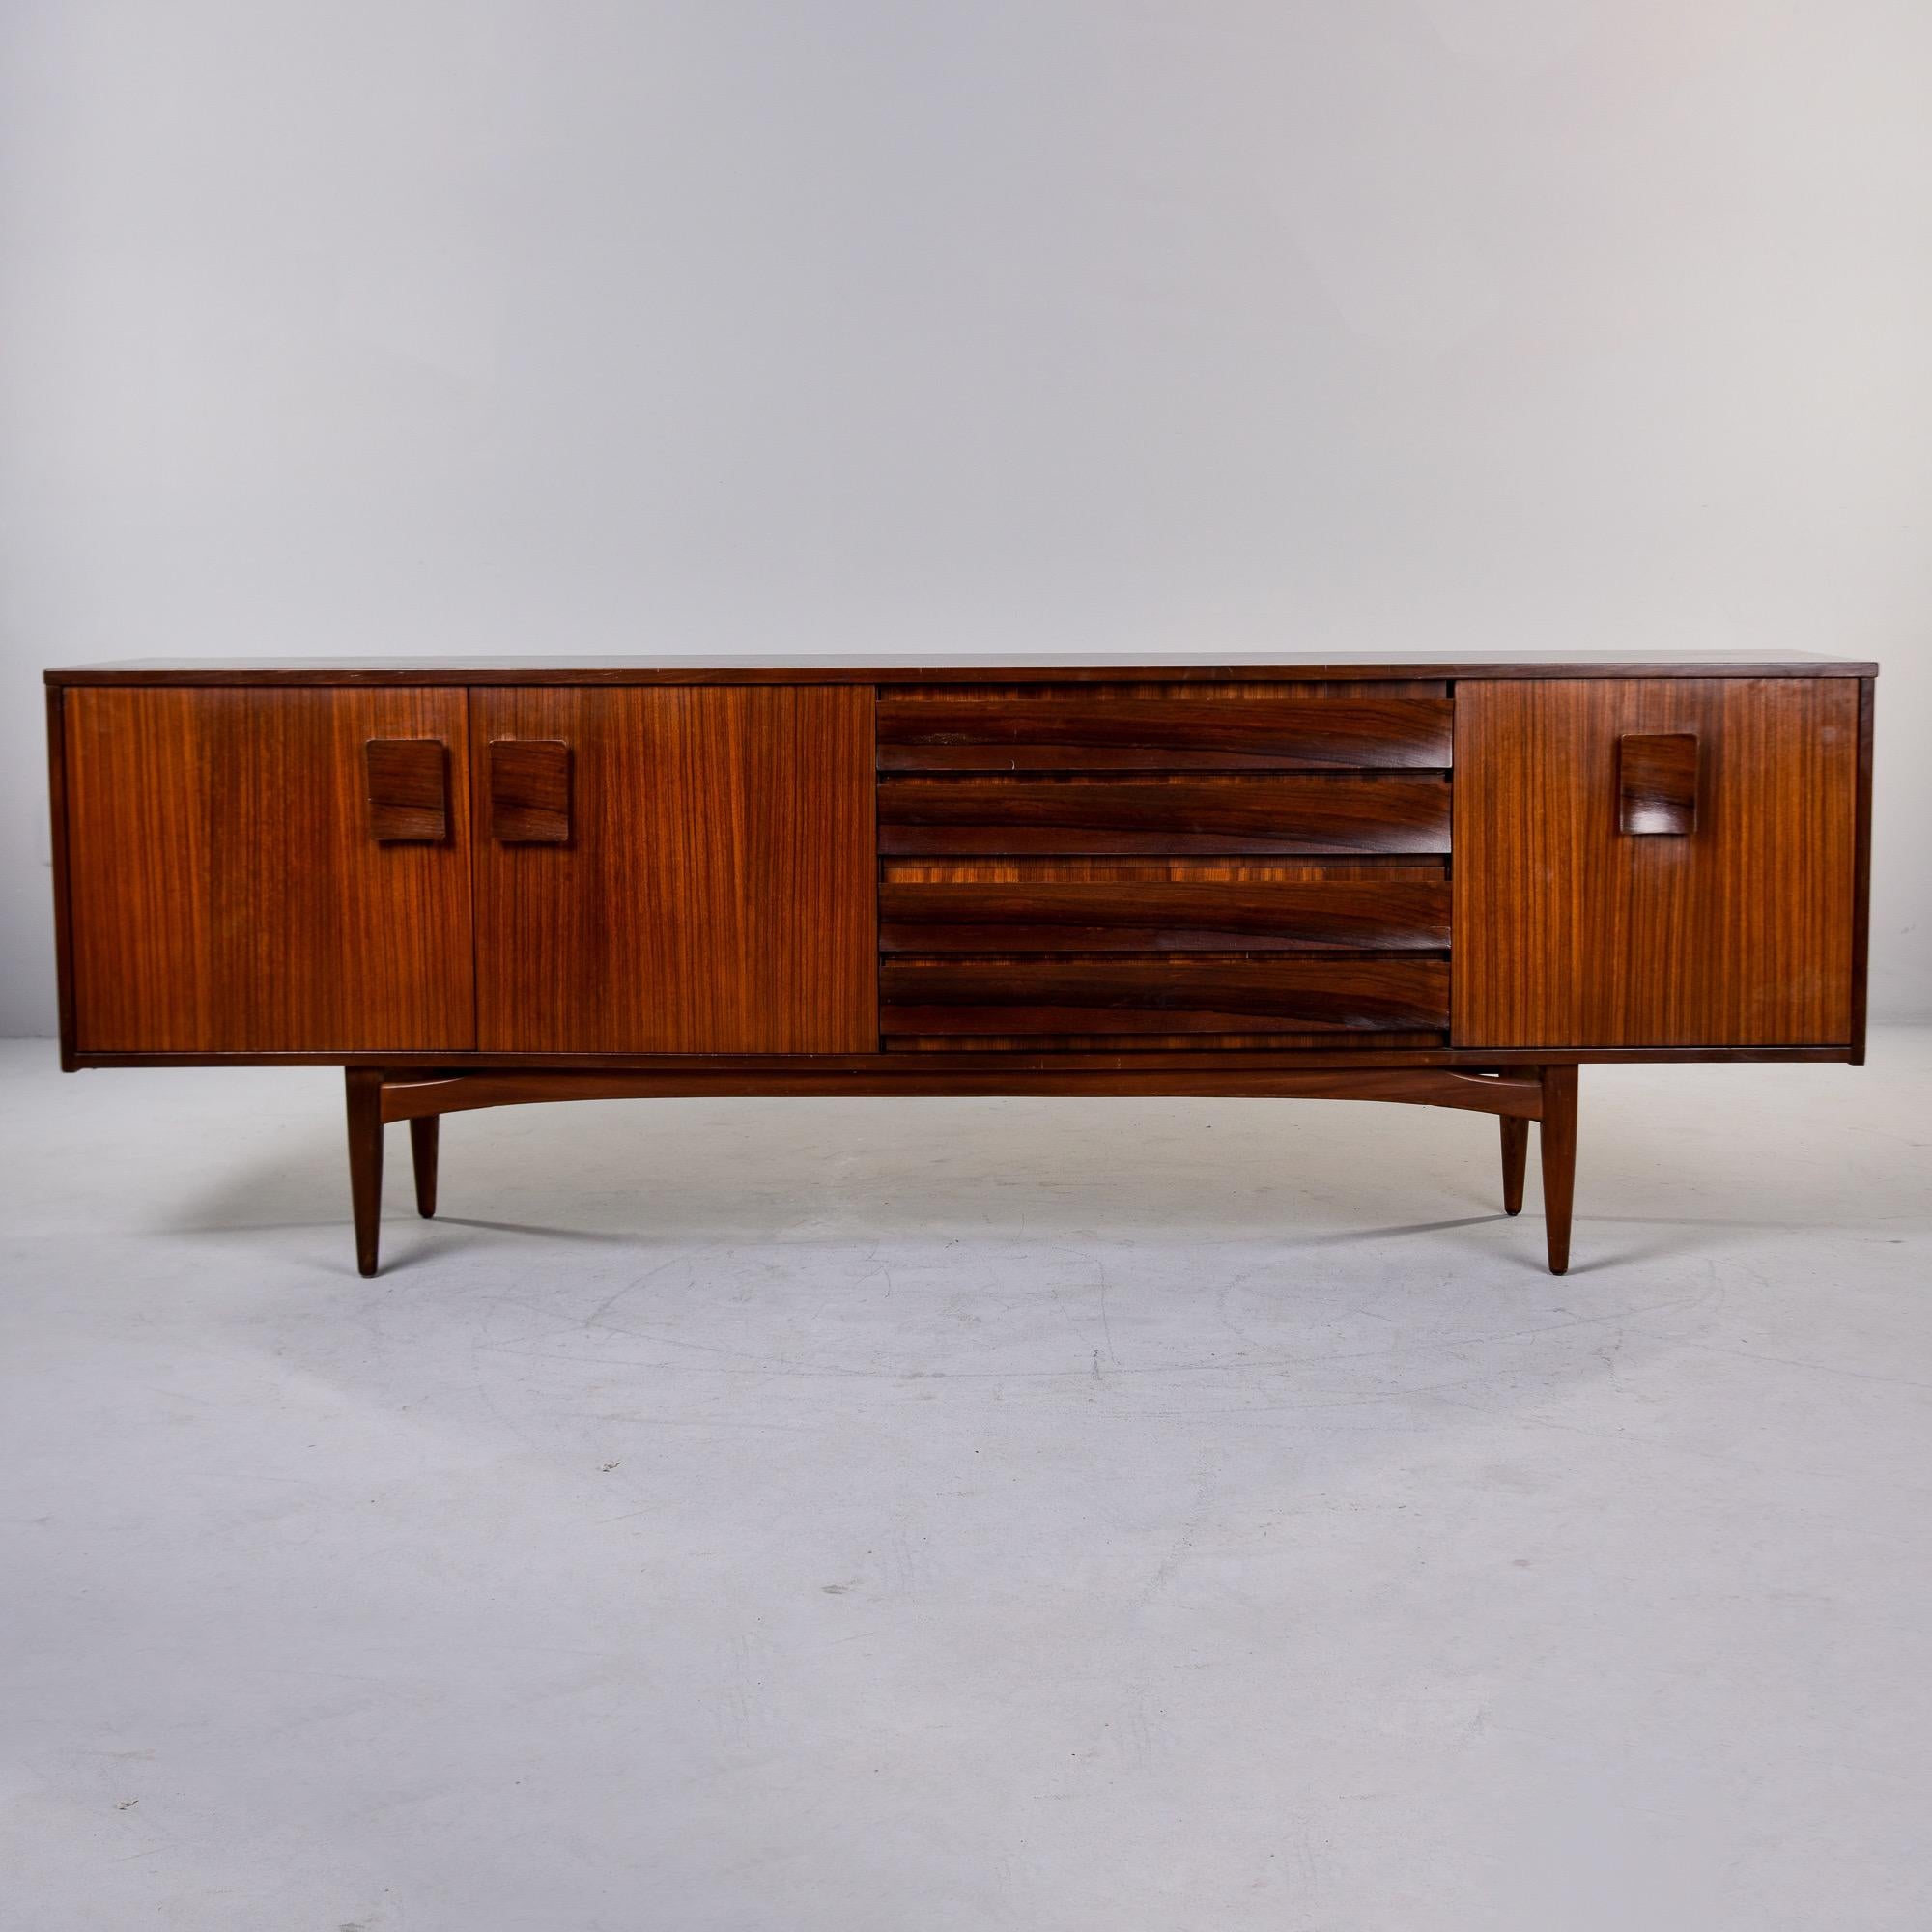 Found in England, this mahogany and rosewood buffet or credenza is by Grange of London and dates from the 1960s. The base features curved stretchers and four slender, tapered legs. The cabinet portion is mahogany with contrasting rosewood drawer